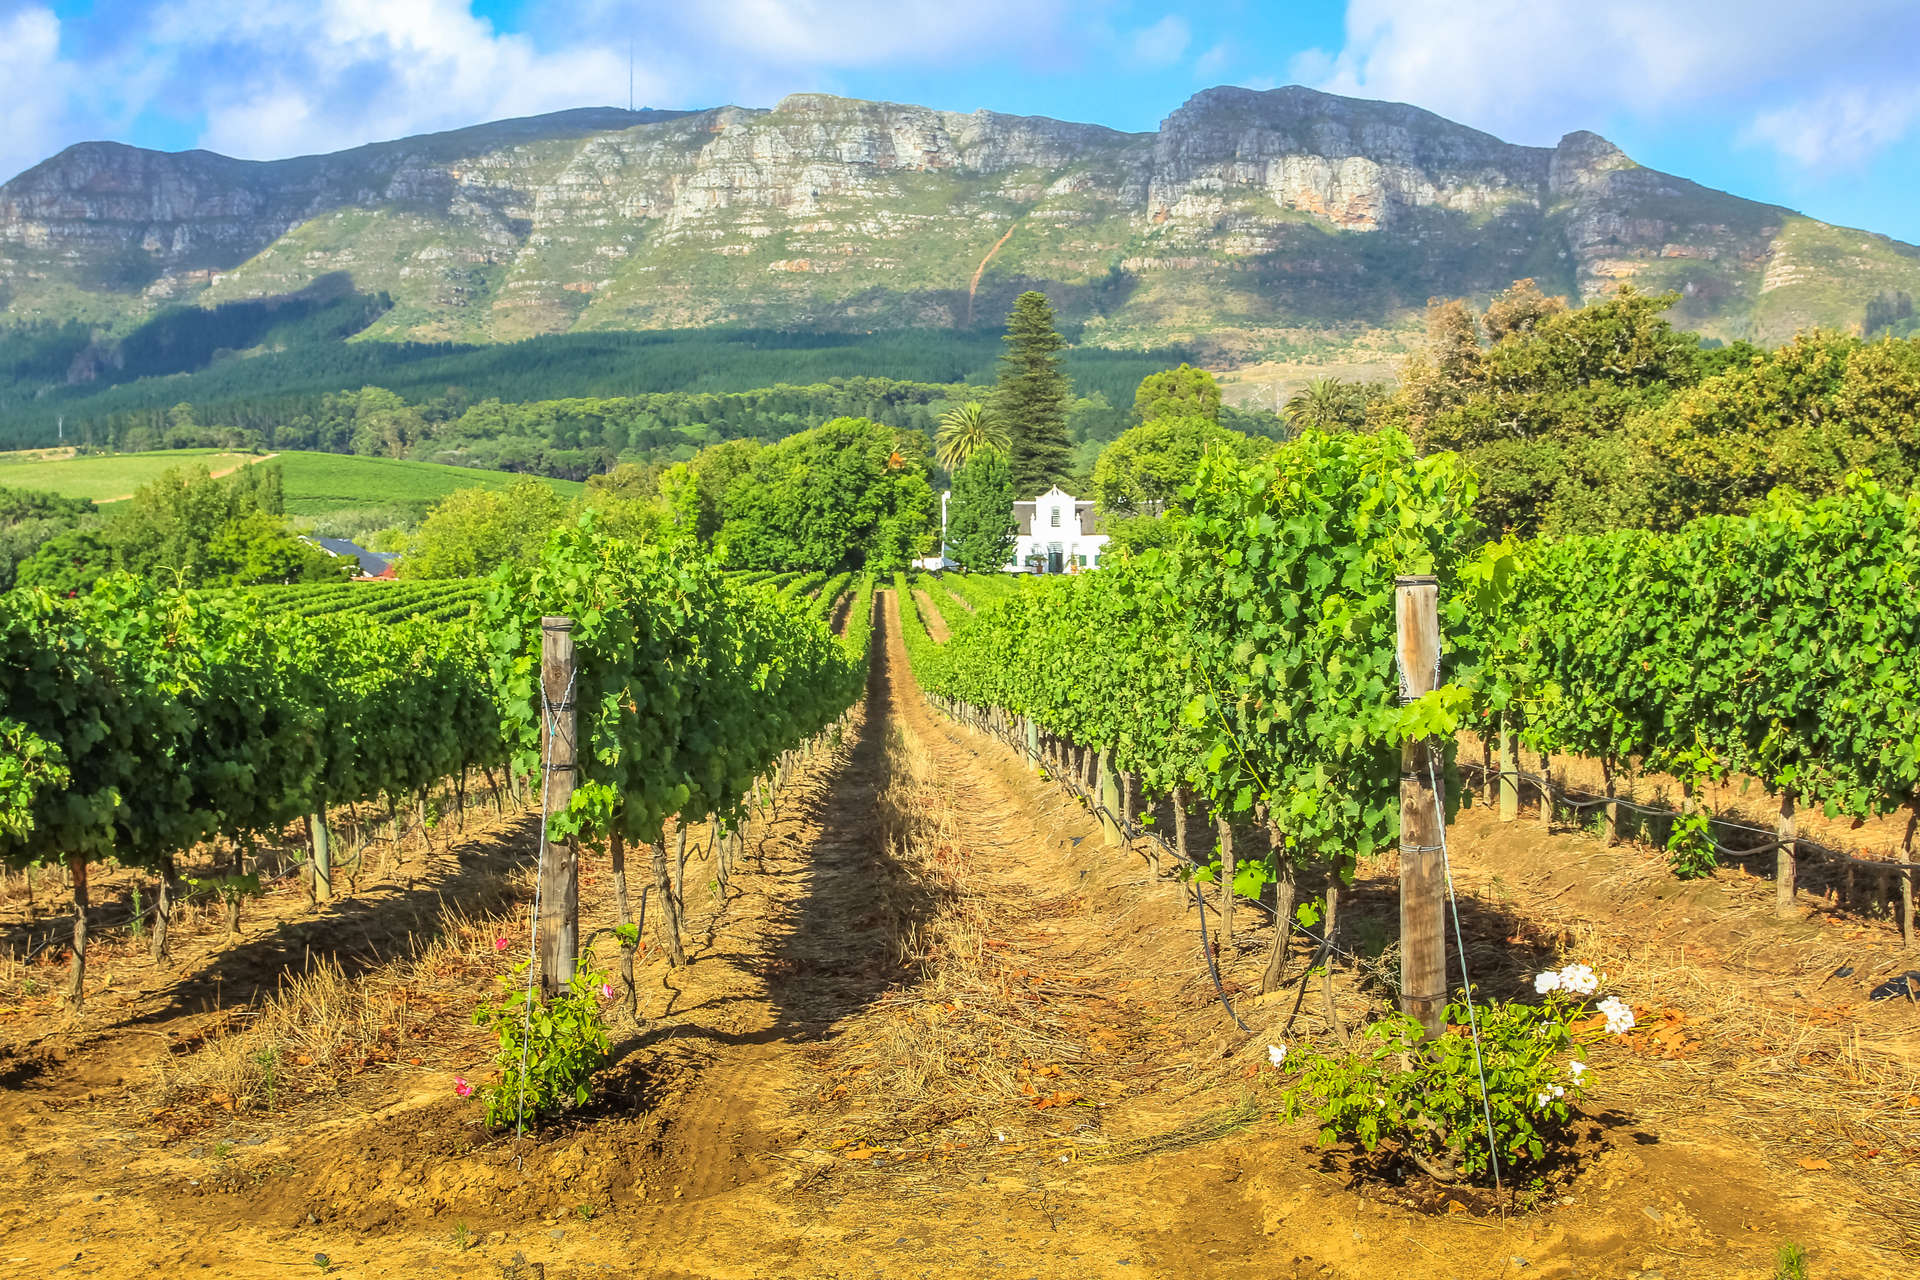 Vineyard with rows of grapes in the scenic landscape of Stellenbosch, near Cape Town